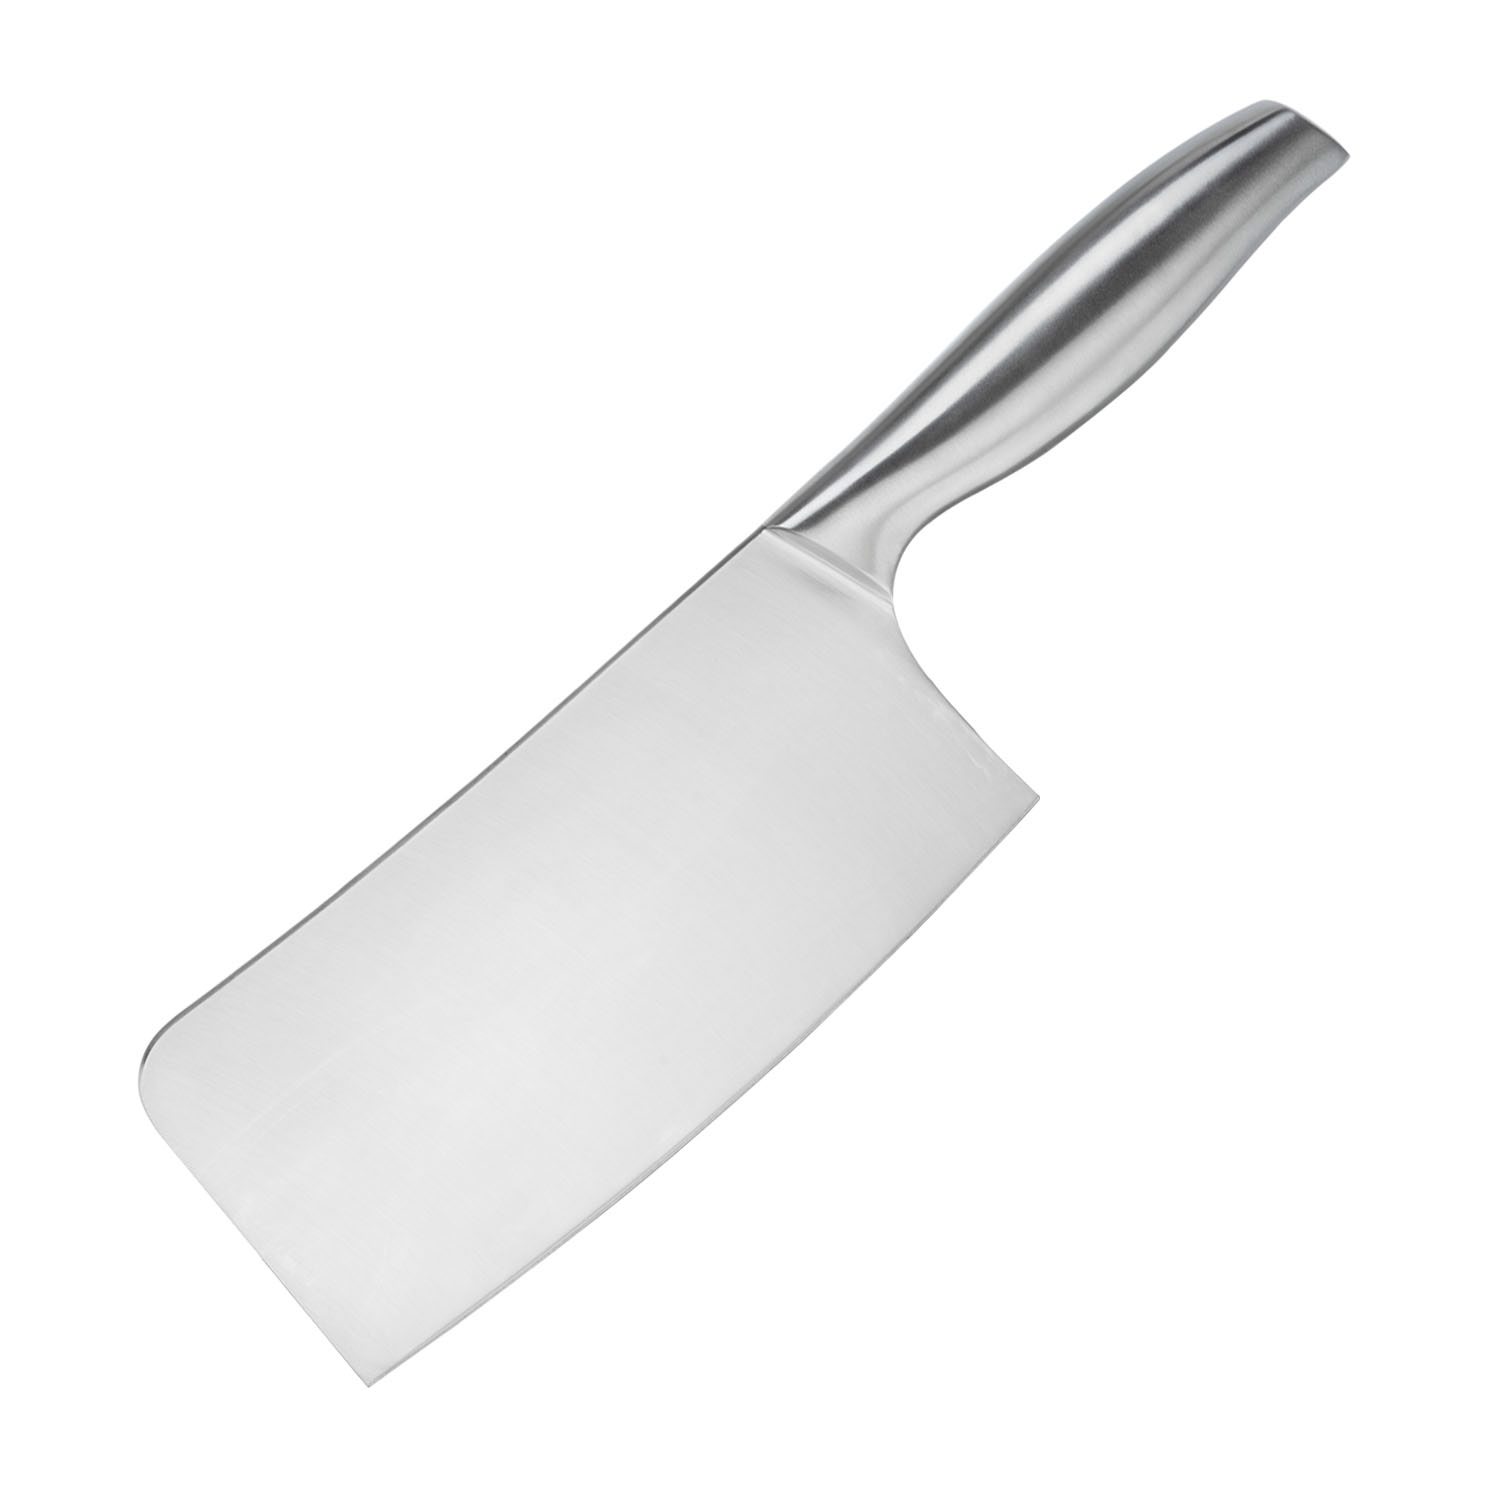 Stainless Steel 7" Cleaver